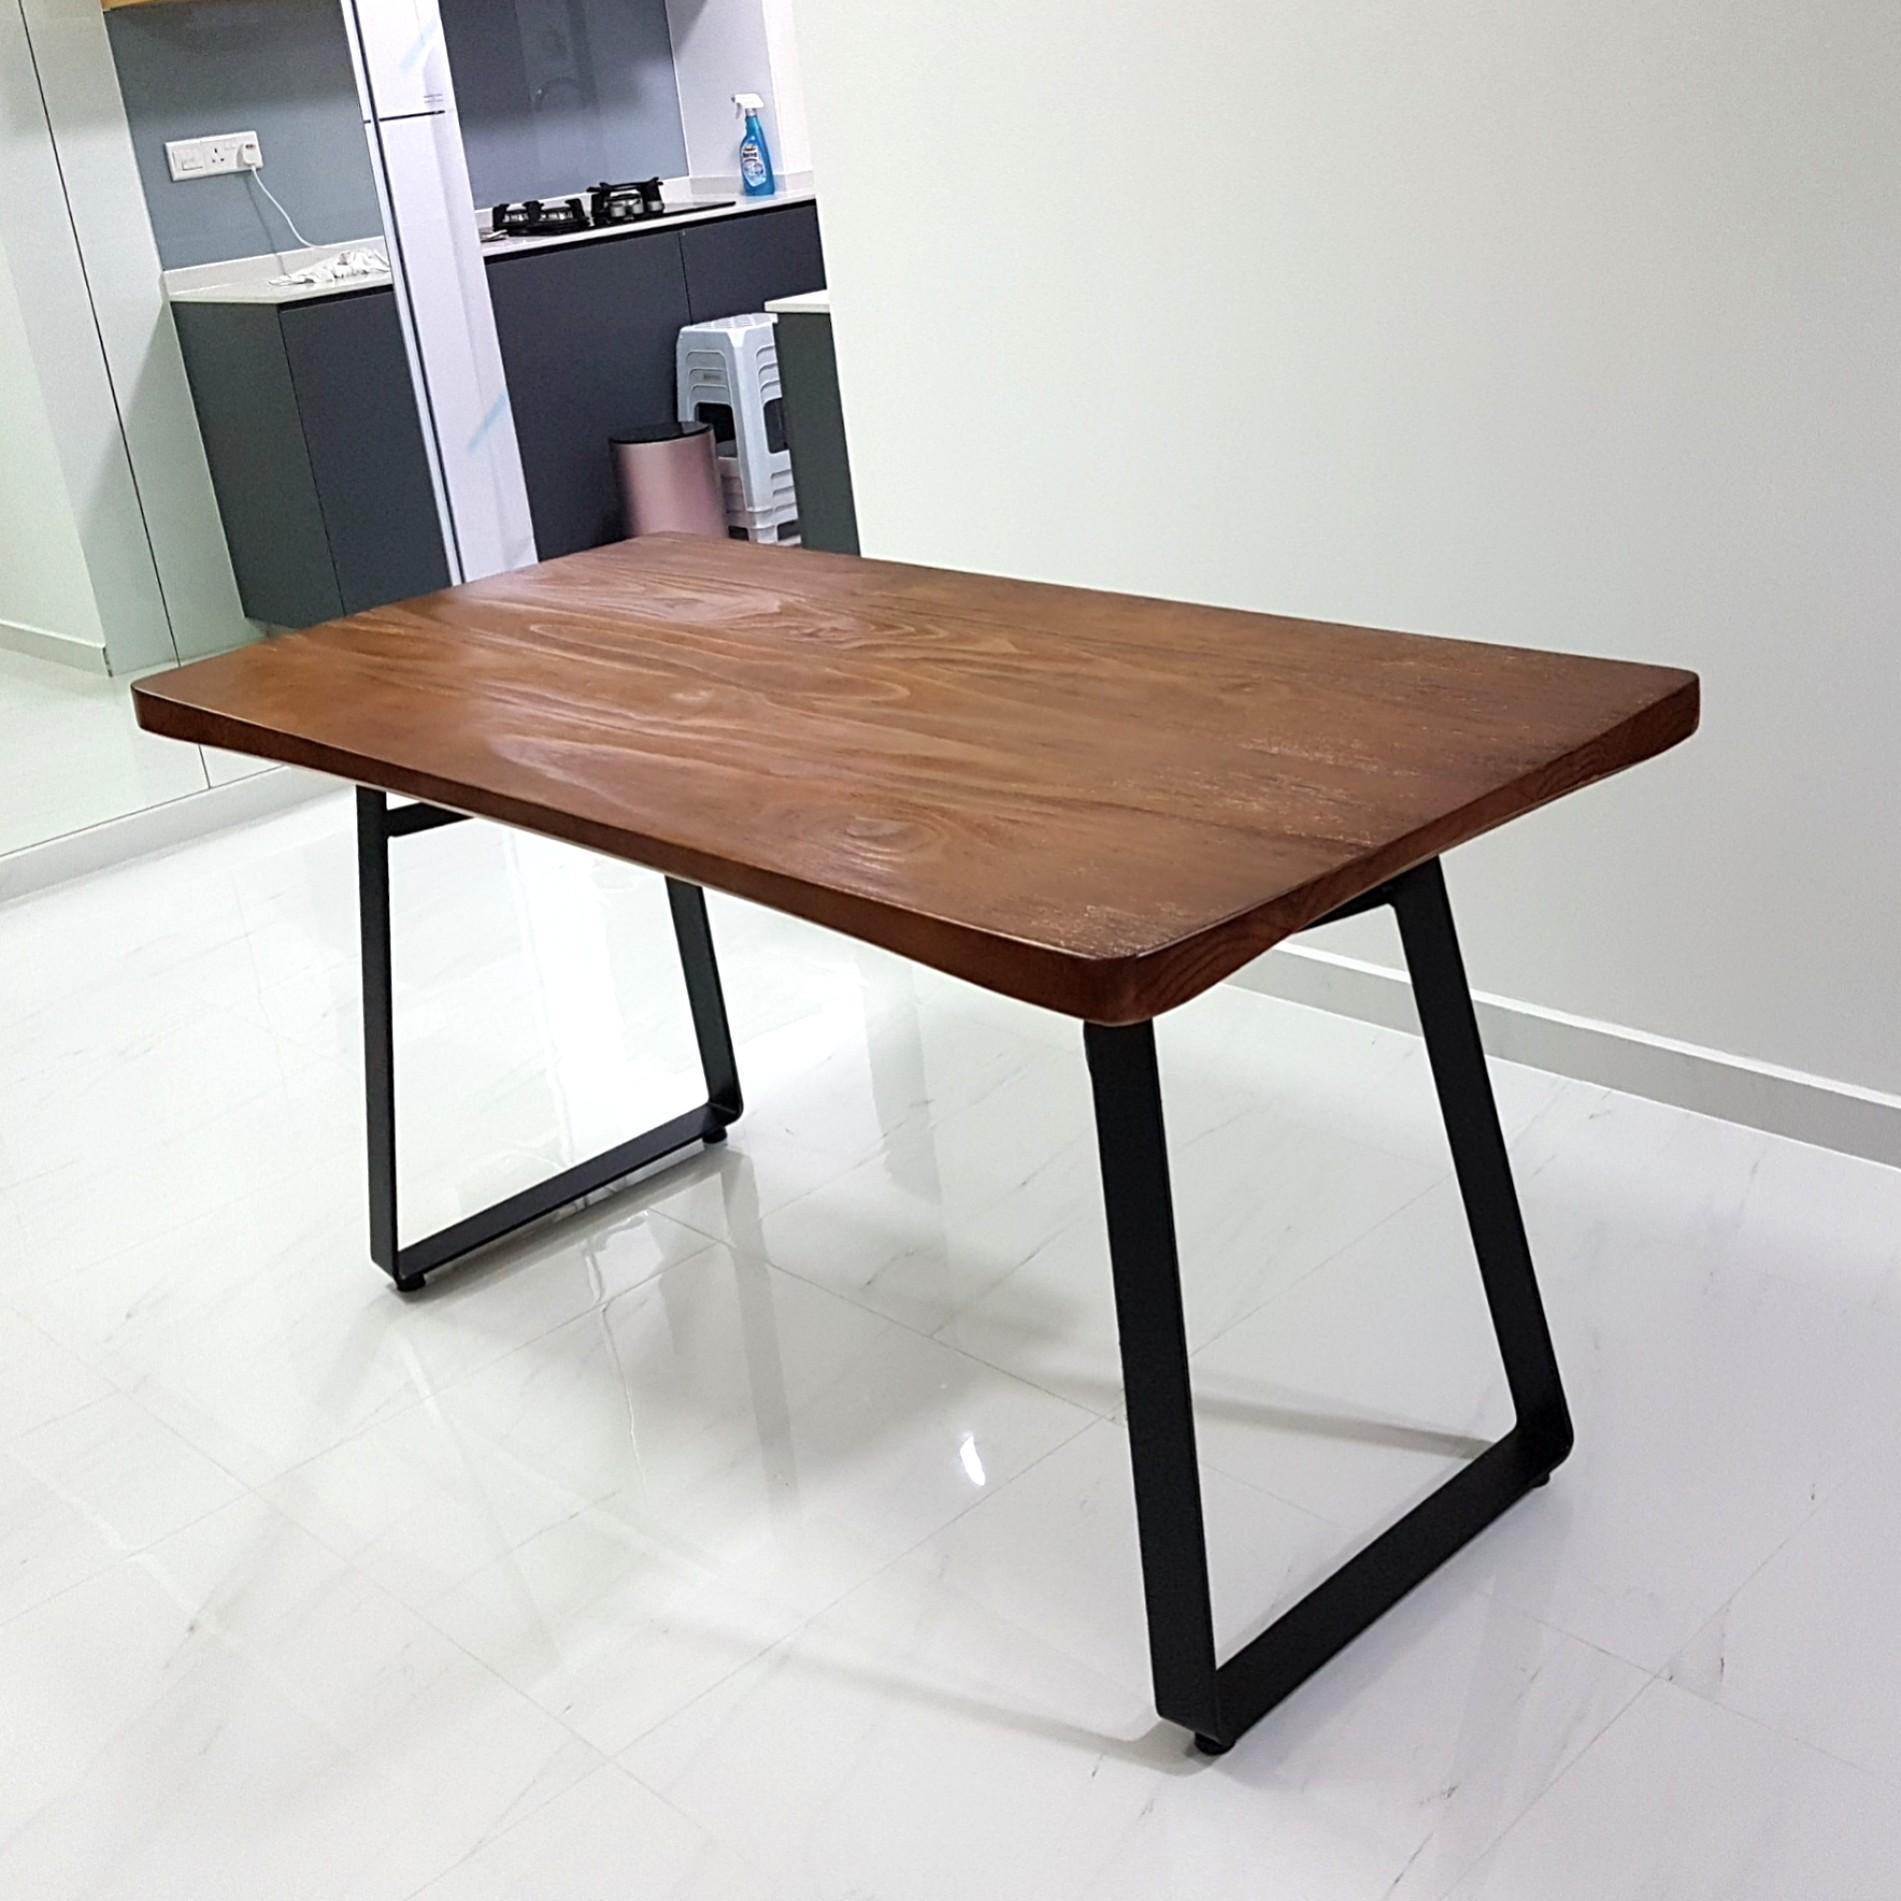 Solid Victoria Ash Dining Table With Angled Black Leg Design Footprint Furniture Store